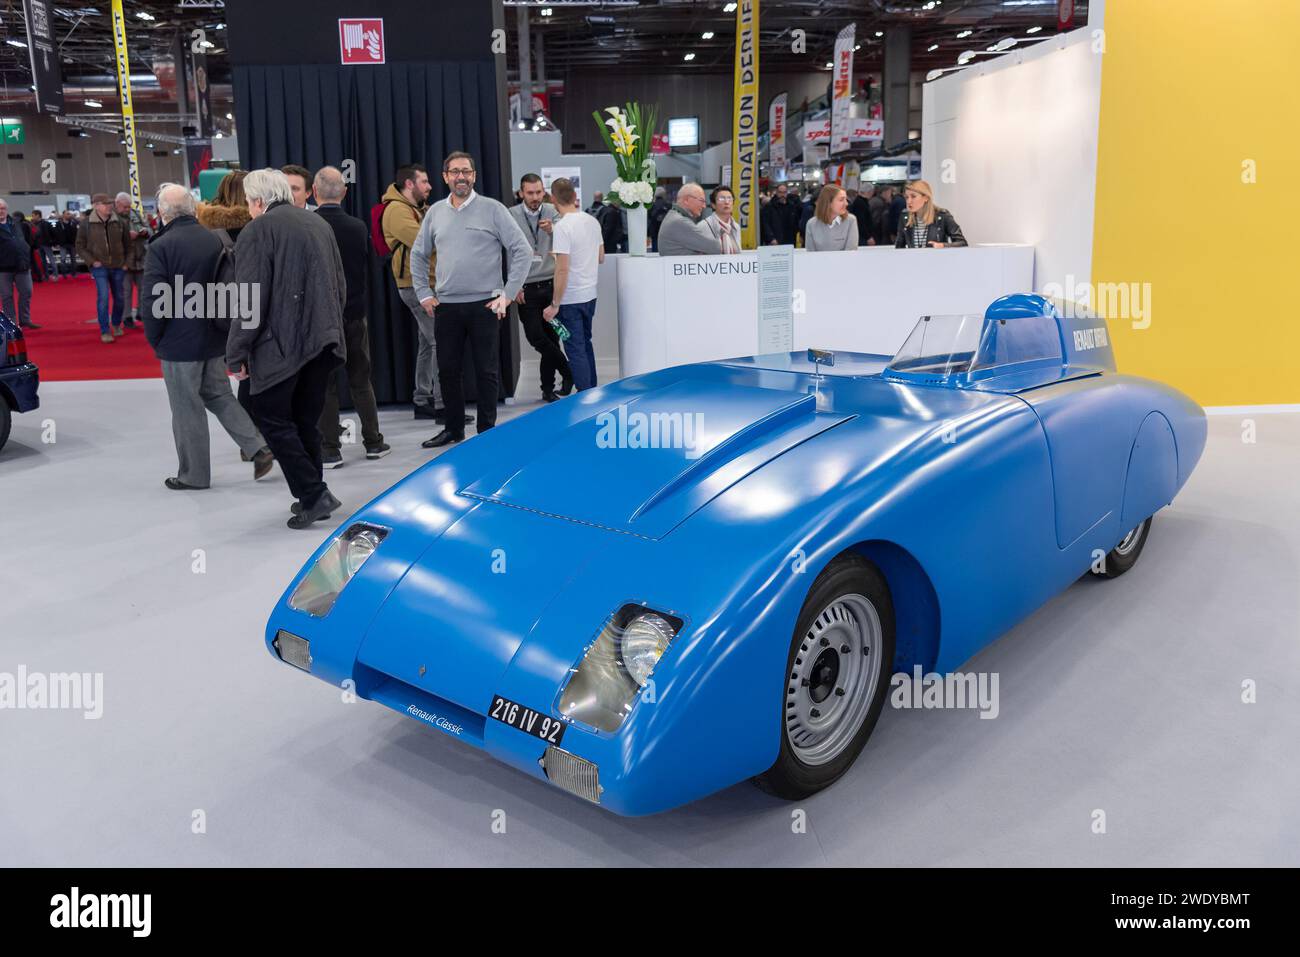 Focus on a blue 1956 Renault Riffard. Competition model designed by aerodynamic engineer Marcel Riffard and equipped with a Renault 4CV engine. Stock Photo